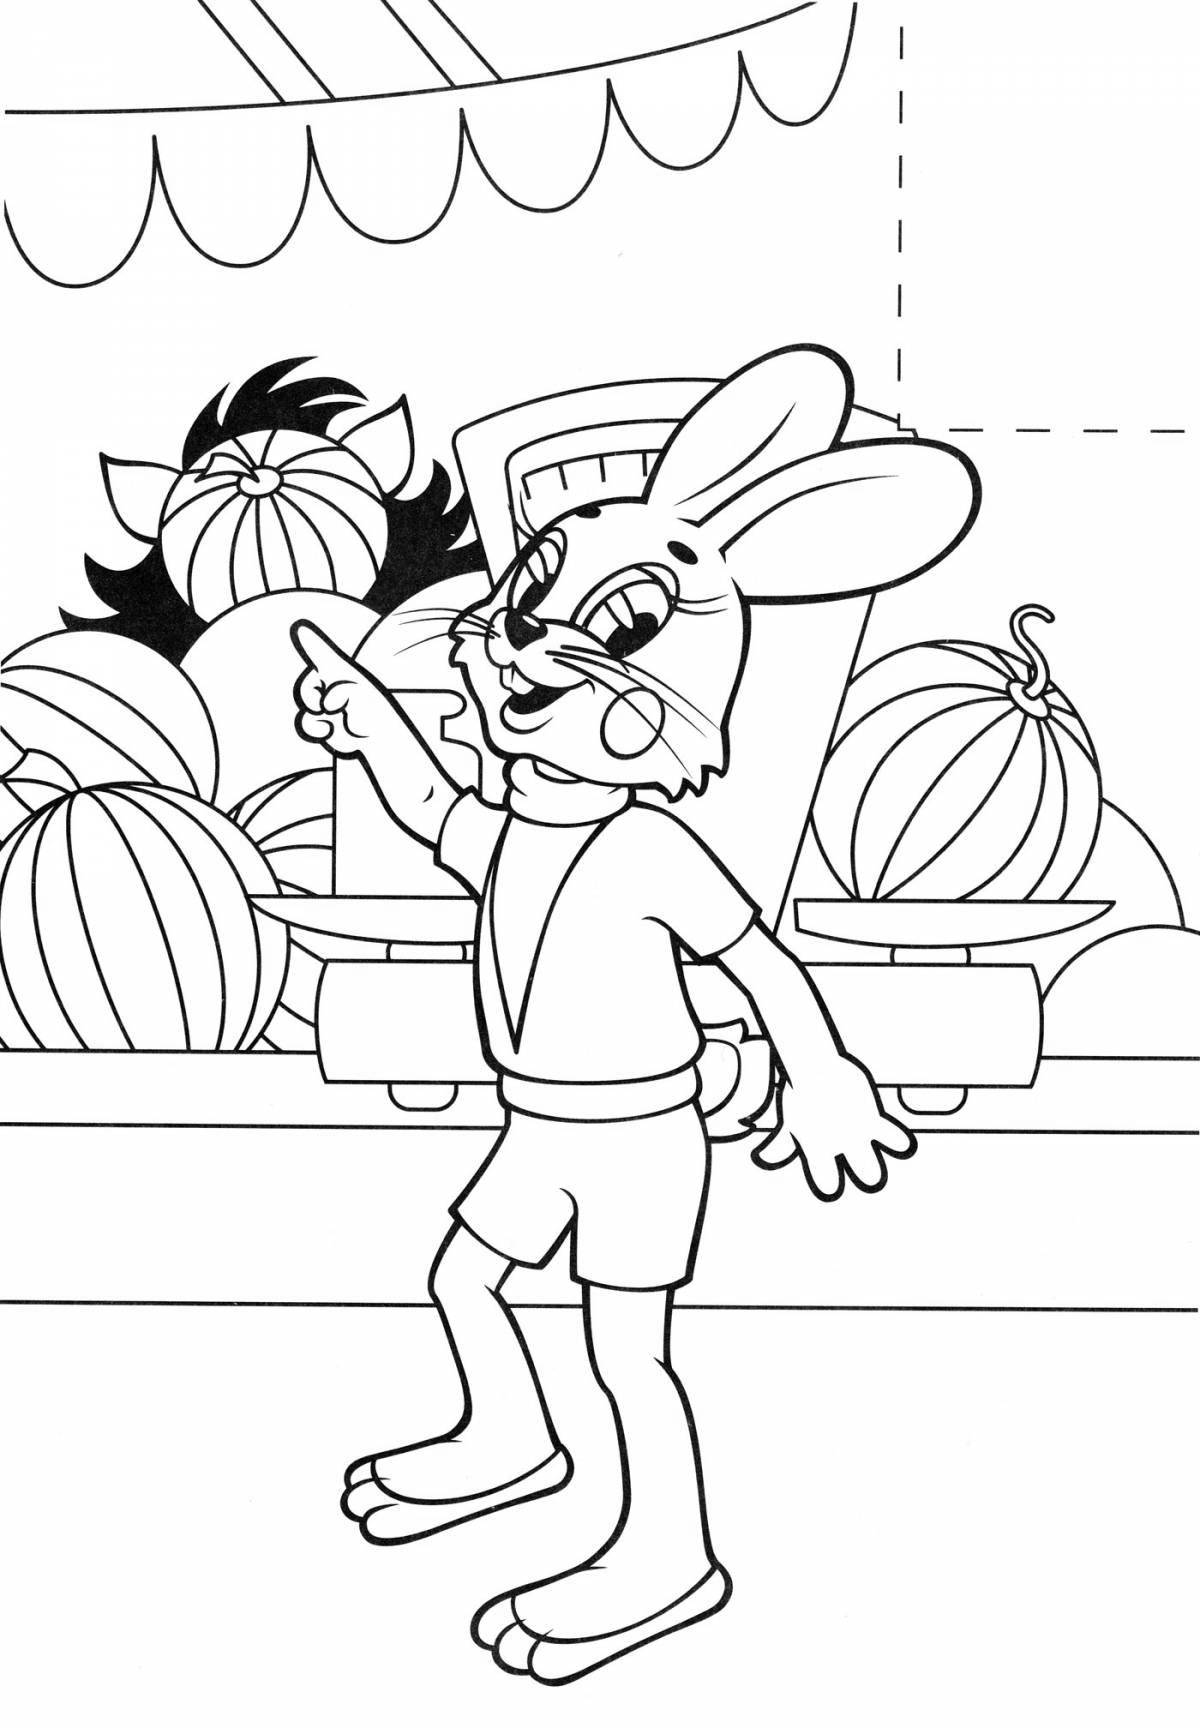 Witty hare coloring book